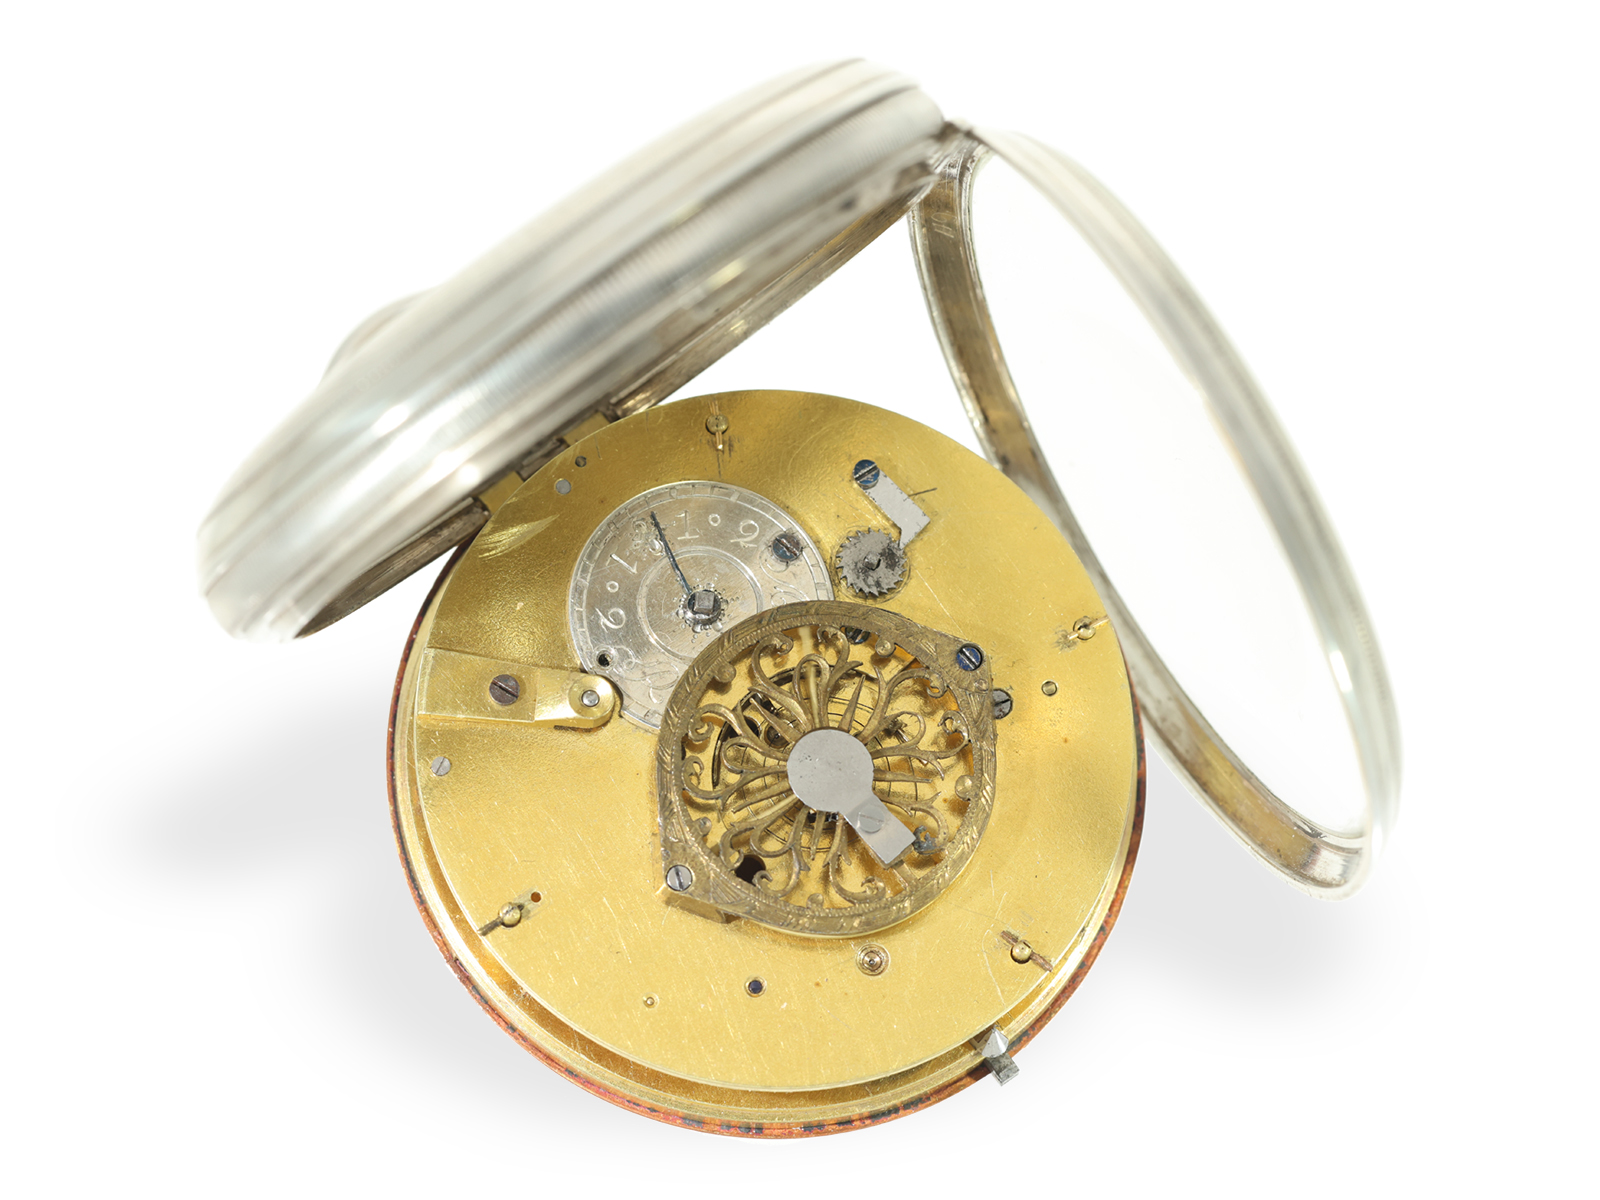 Pocket watch: large astronomical verge watch with seconds display, Switzerland around 1800 - Image 3 of 4